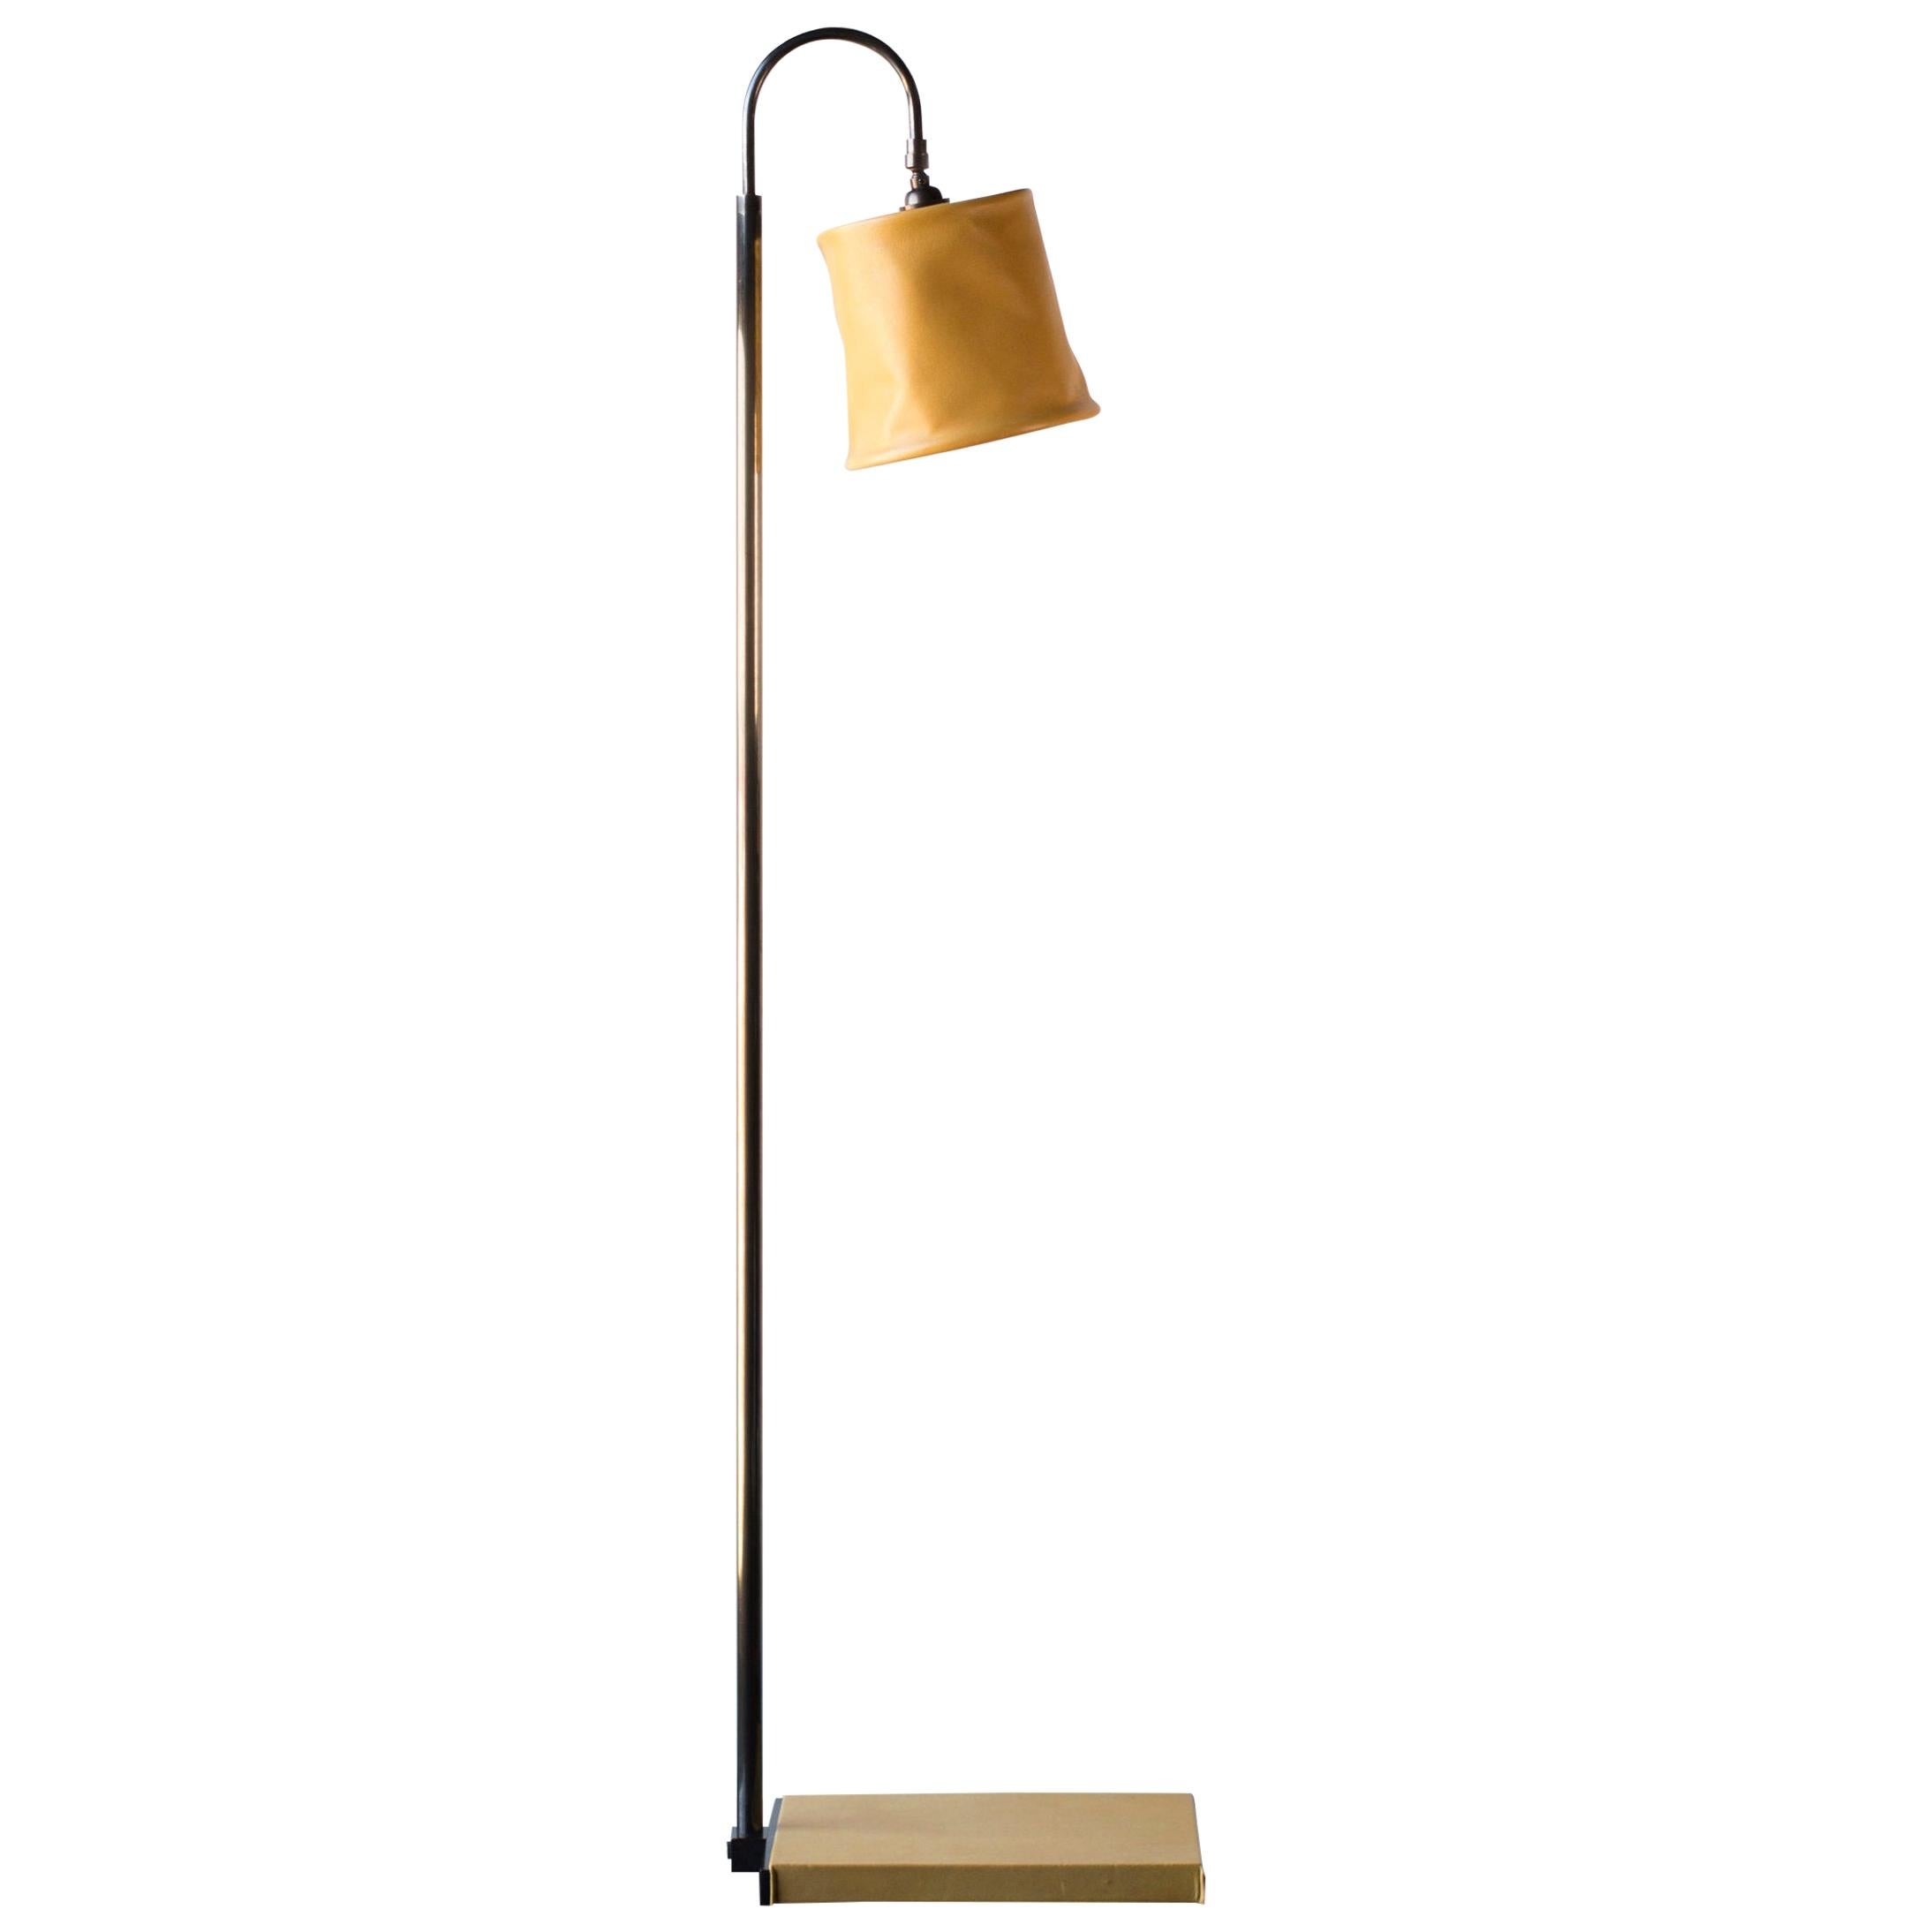 Series01 Floor Lamp, Hand-Dyed Mustard Yellow Leather, Dark Patinated Brass